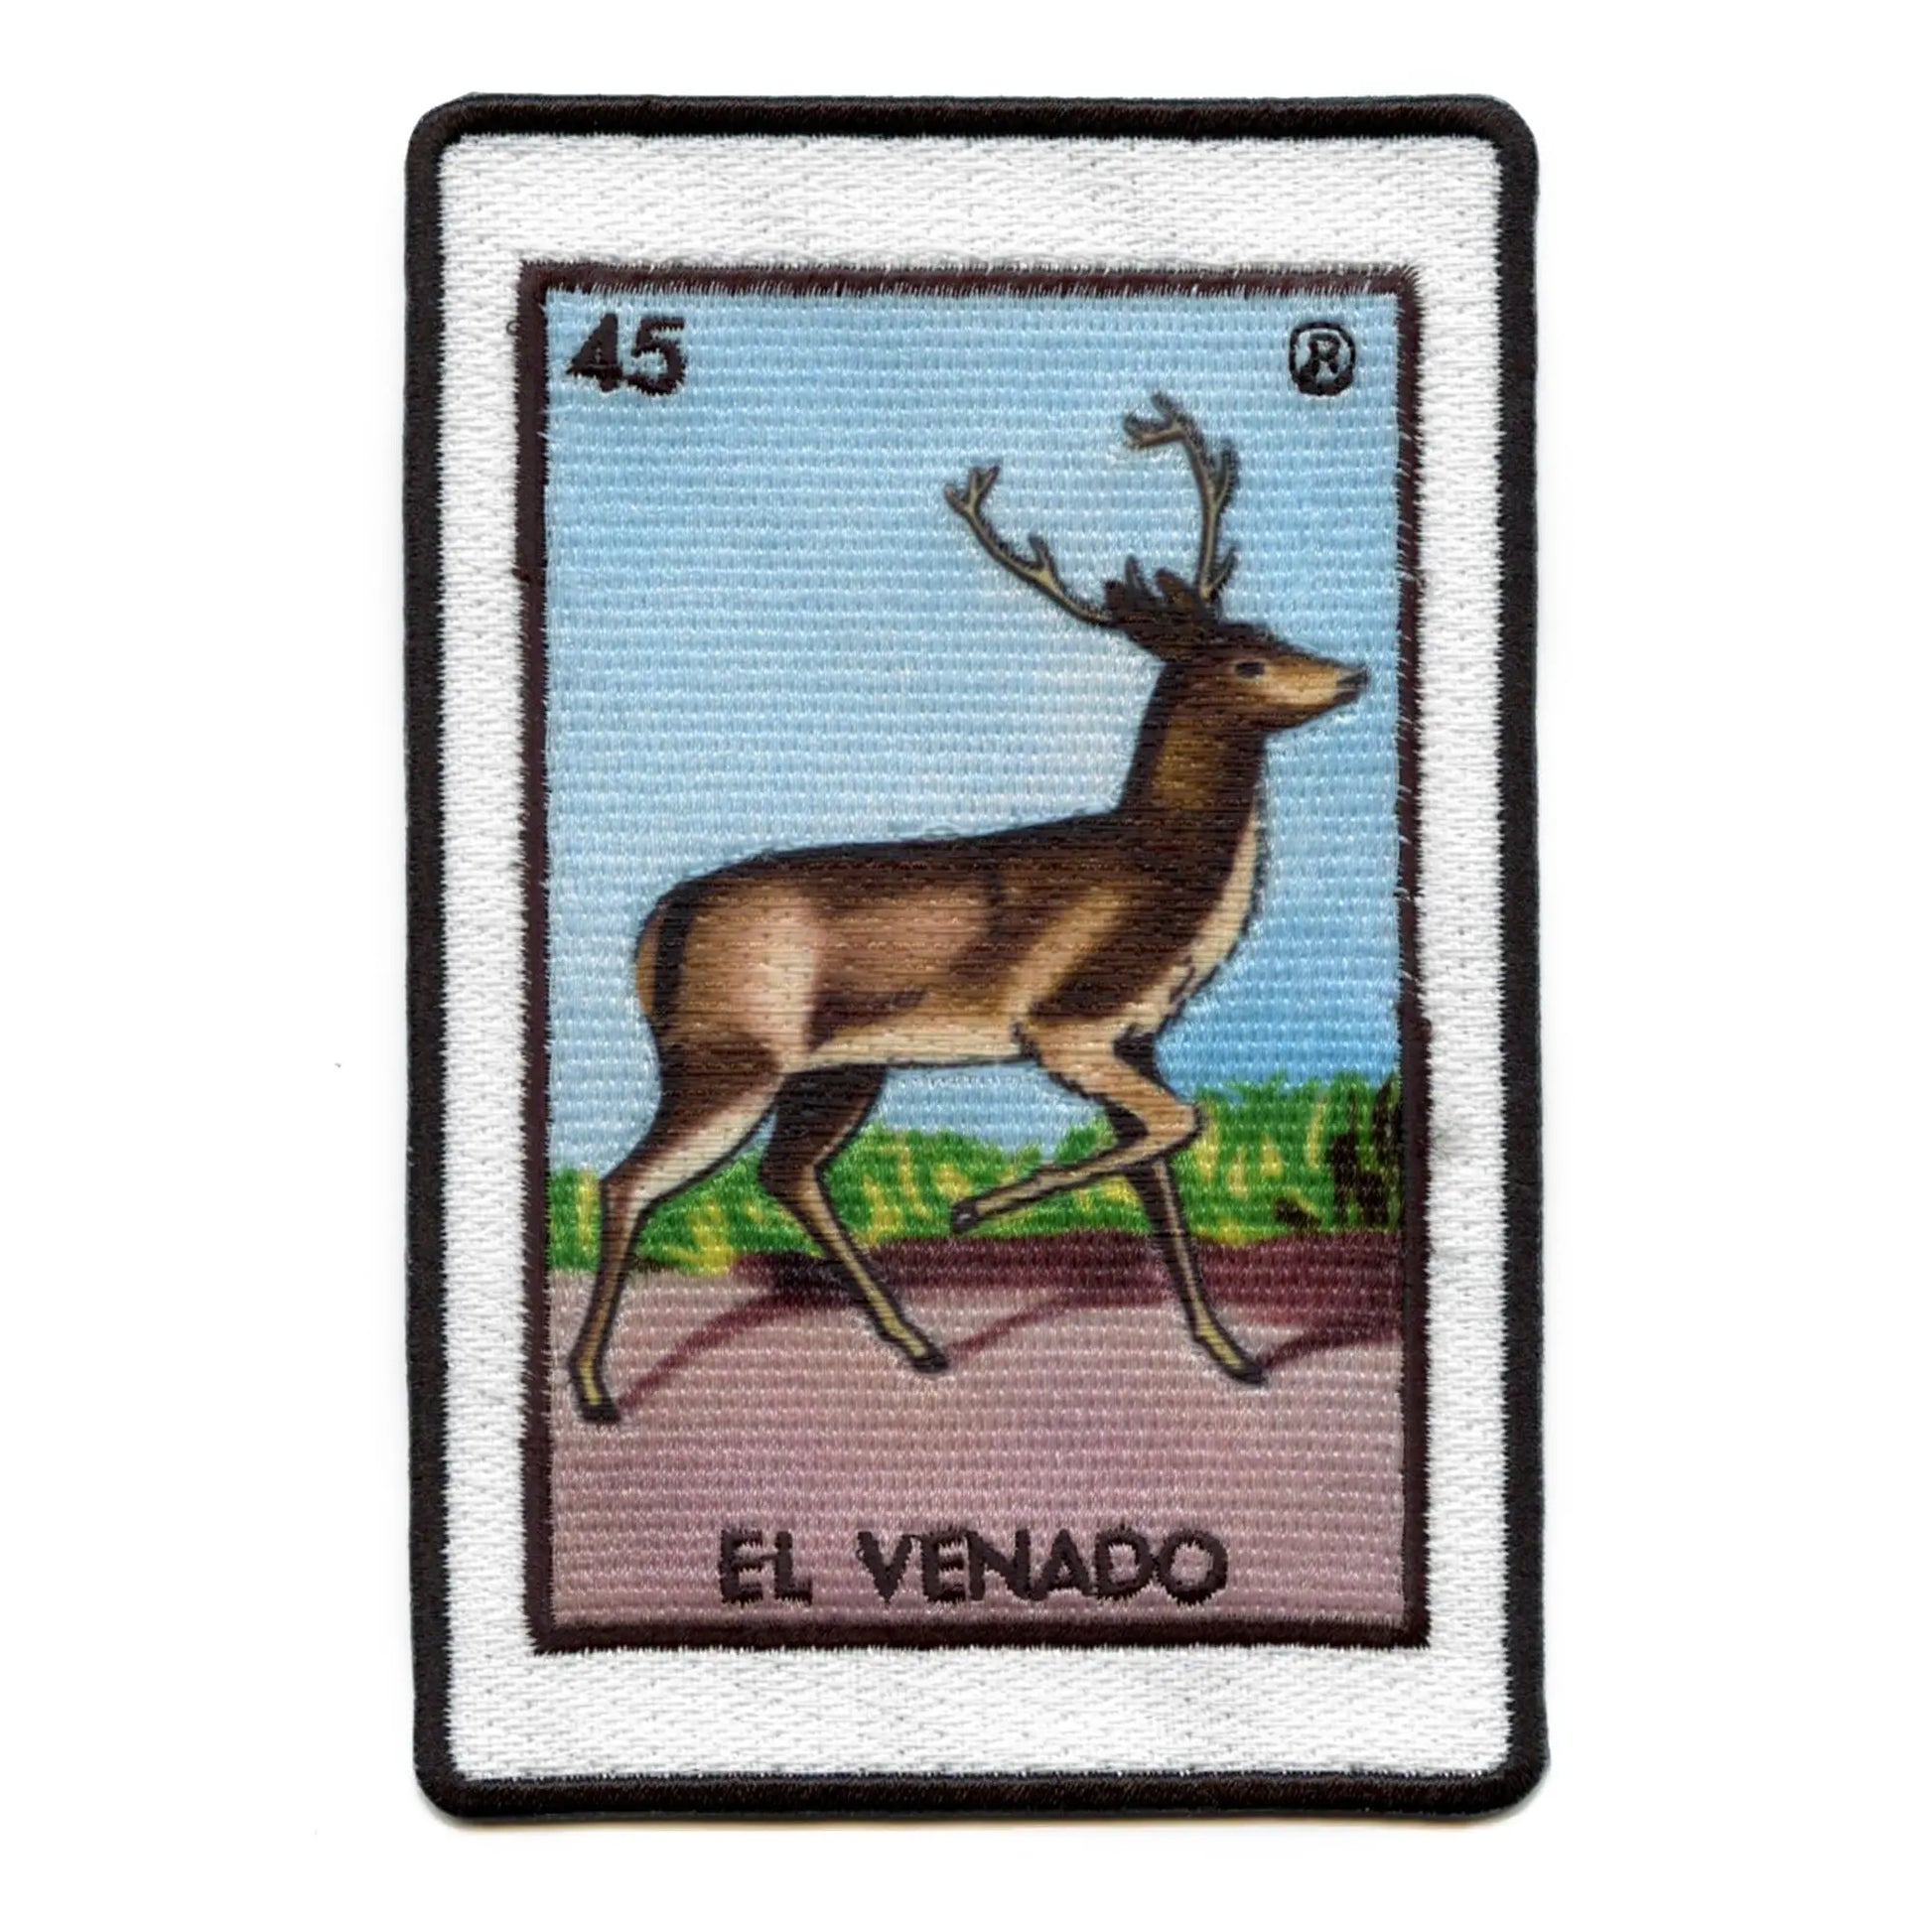 El Venado 45 Patch Mexican Loteria Card Sublimated Embroidery Iron On